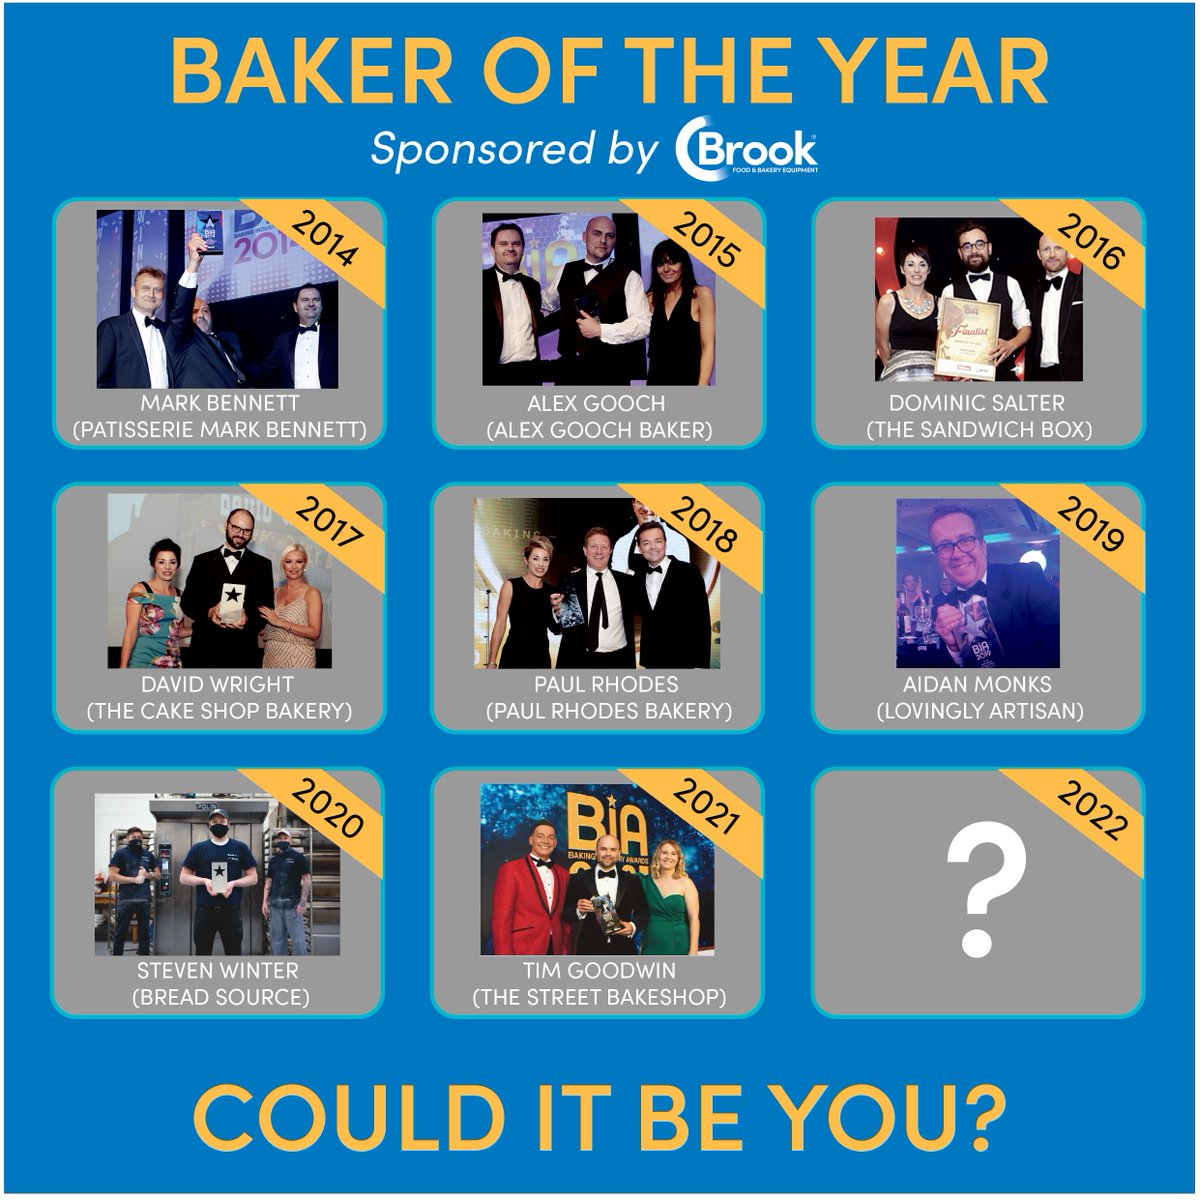 COULD YOU BE THE NEXT BAKER OF THE YEAR? Follow the link in our BIO to enter! #bakeryawards #bakeroftheyear #bakery #baking #baker #awards @britishbaker